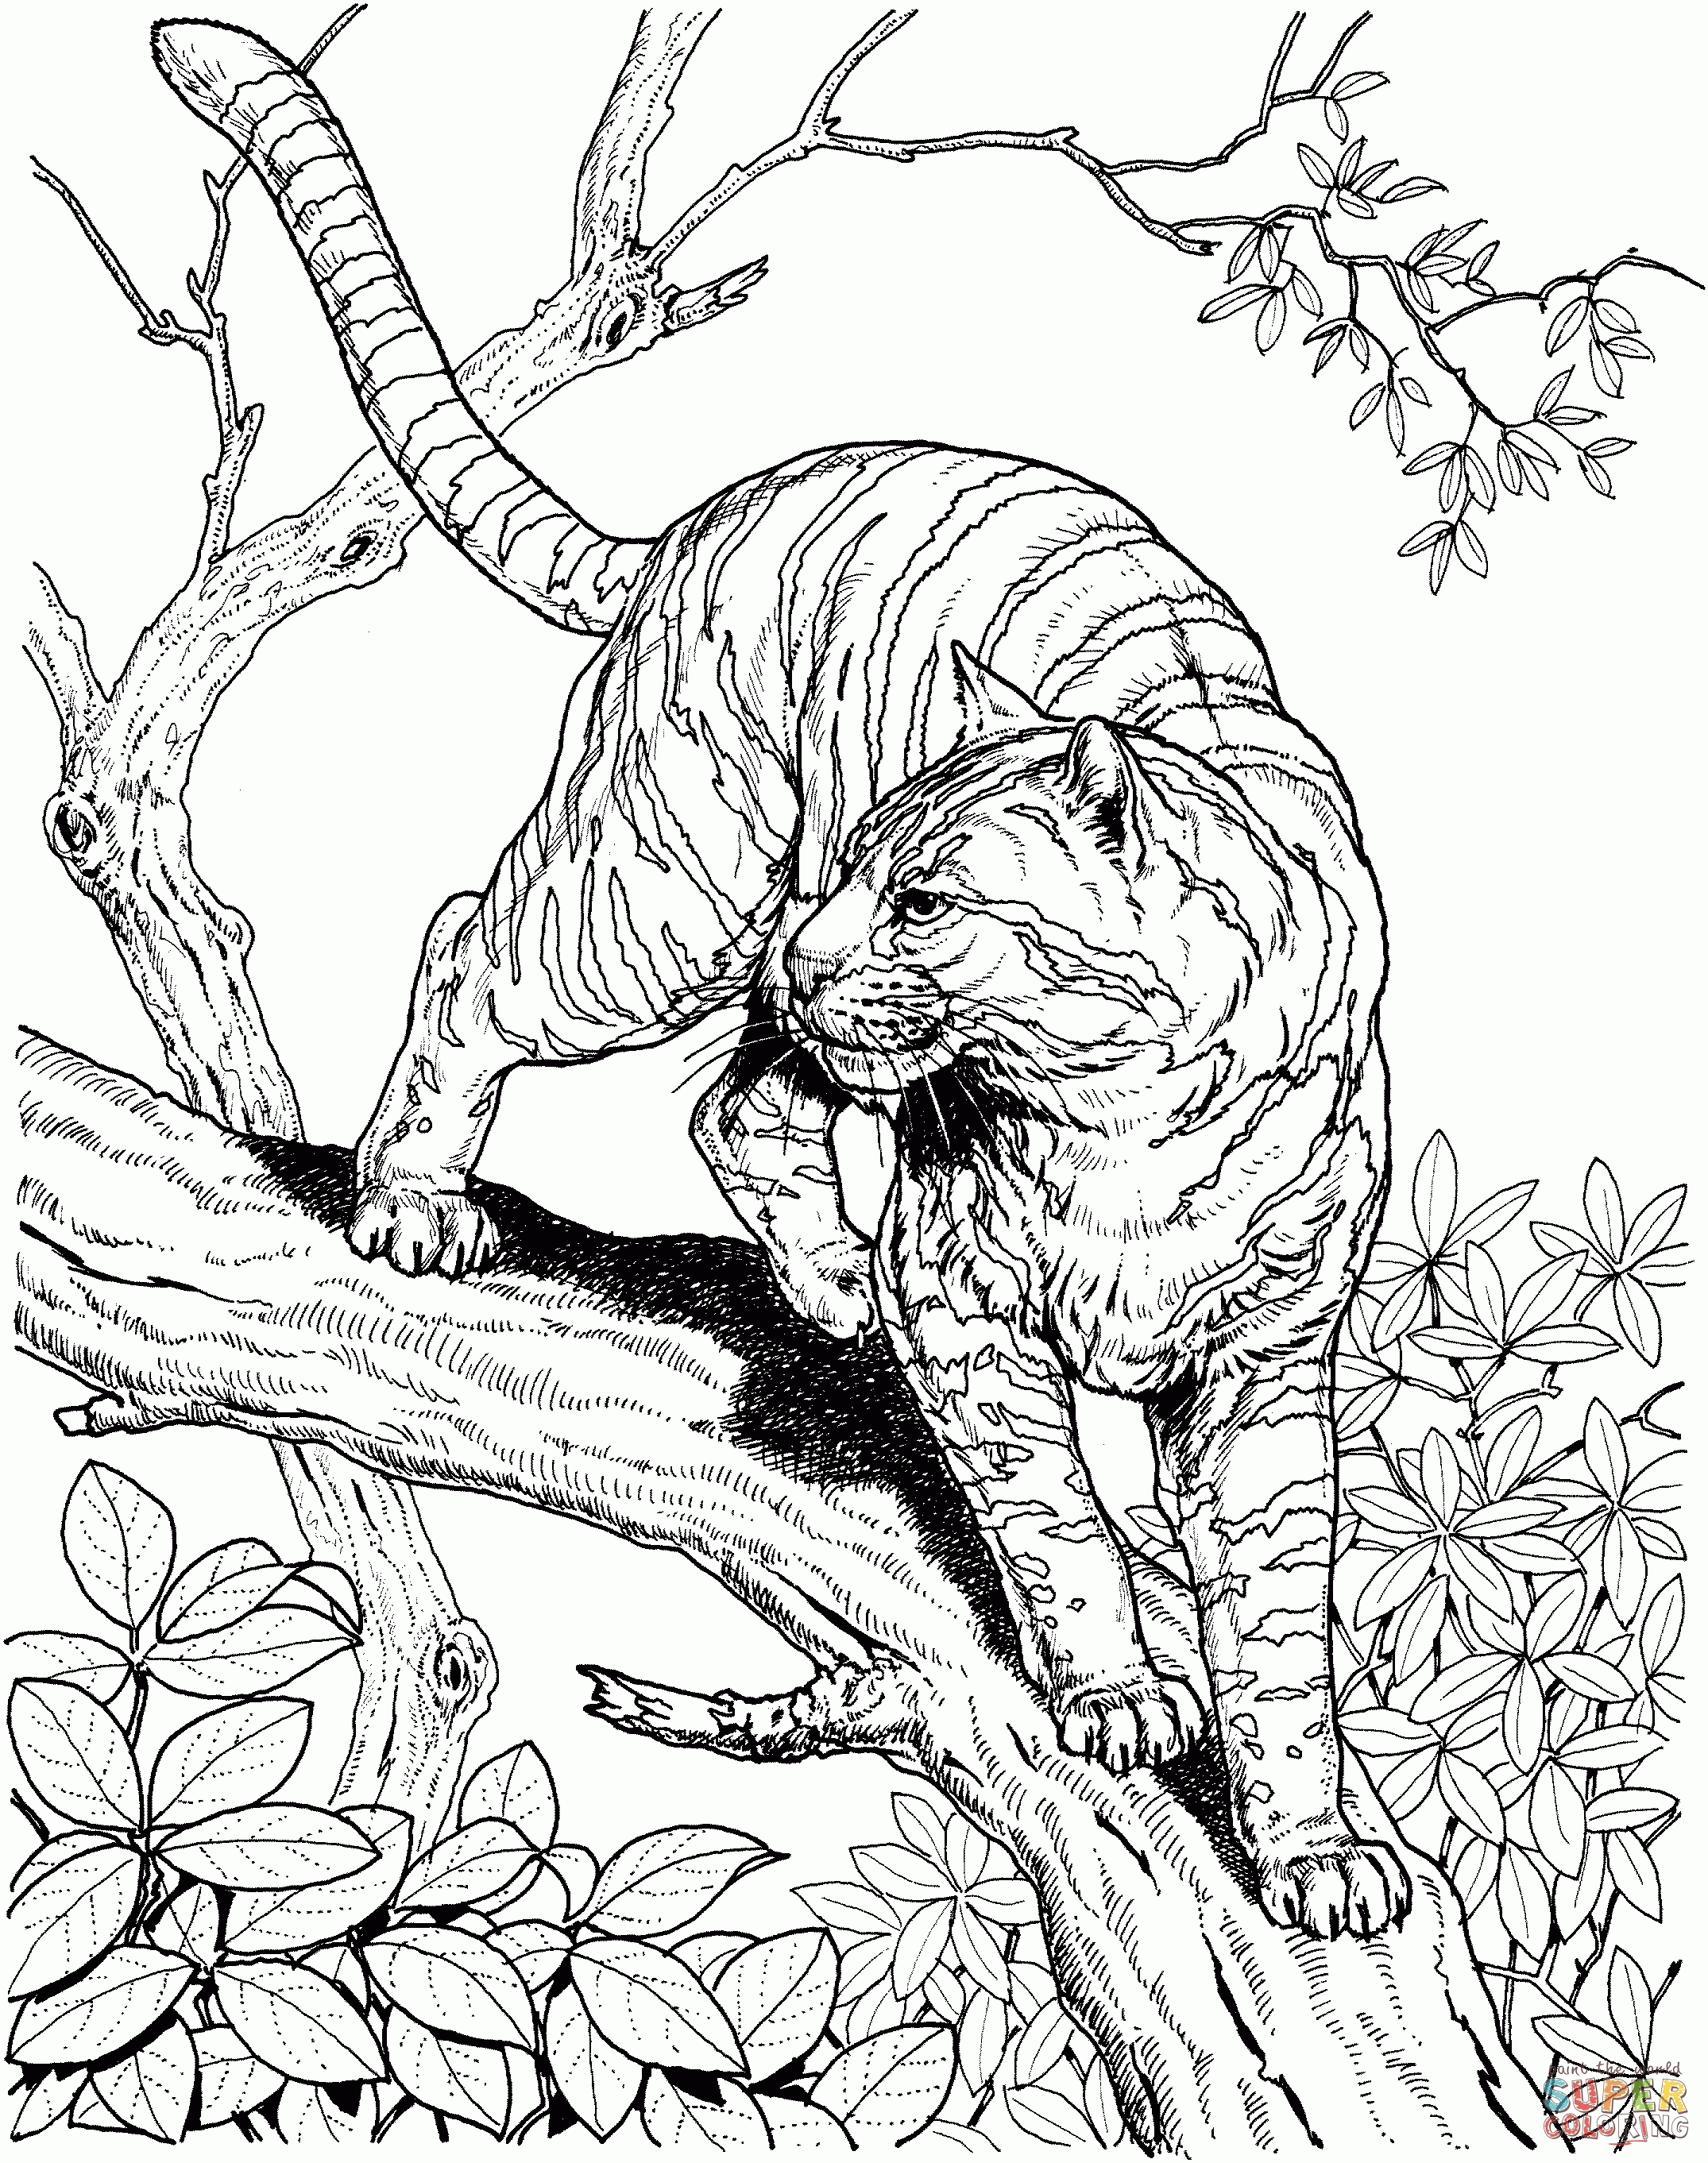 Realistic Wild Animal Coloring Pages Realistic images of wild animals